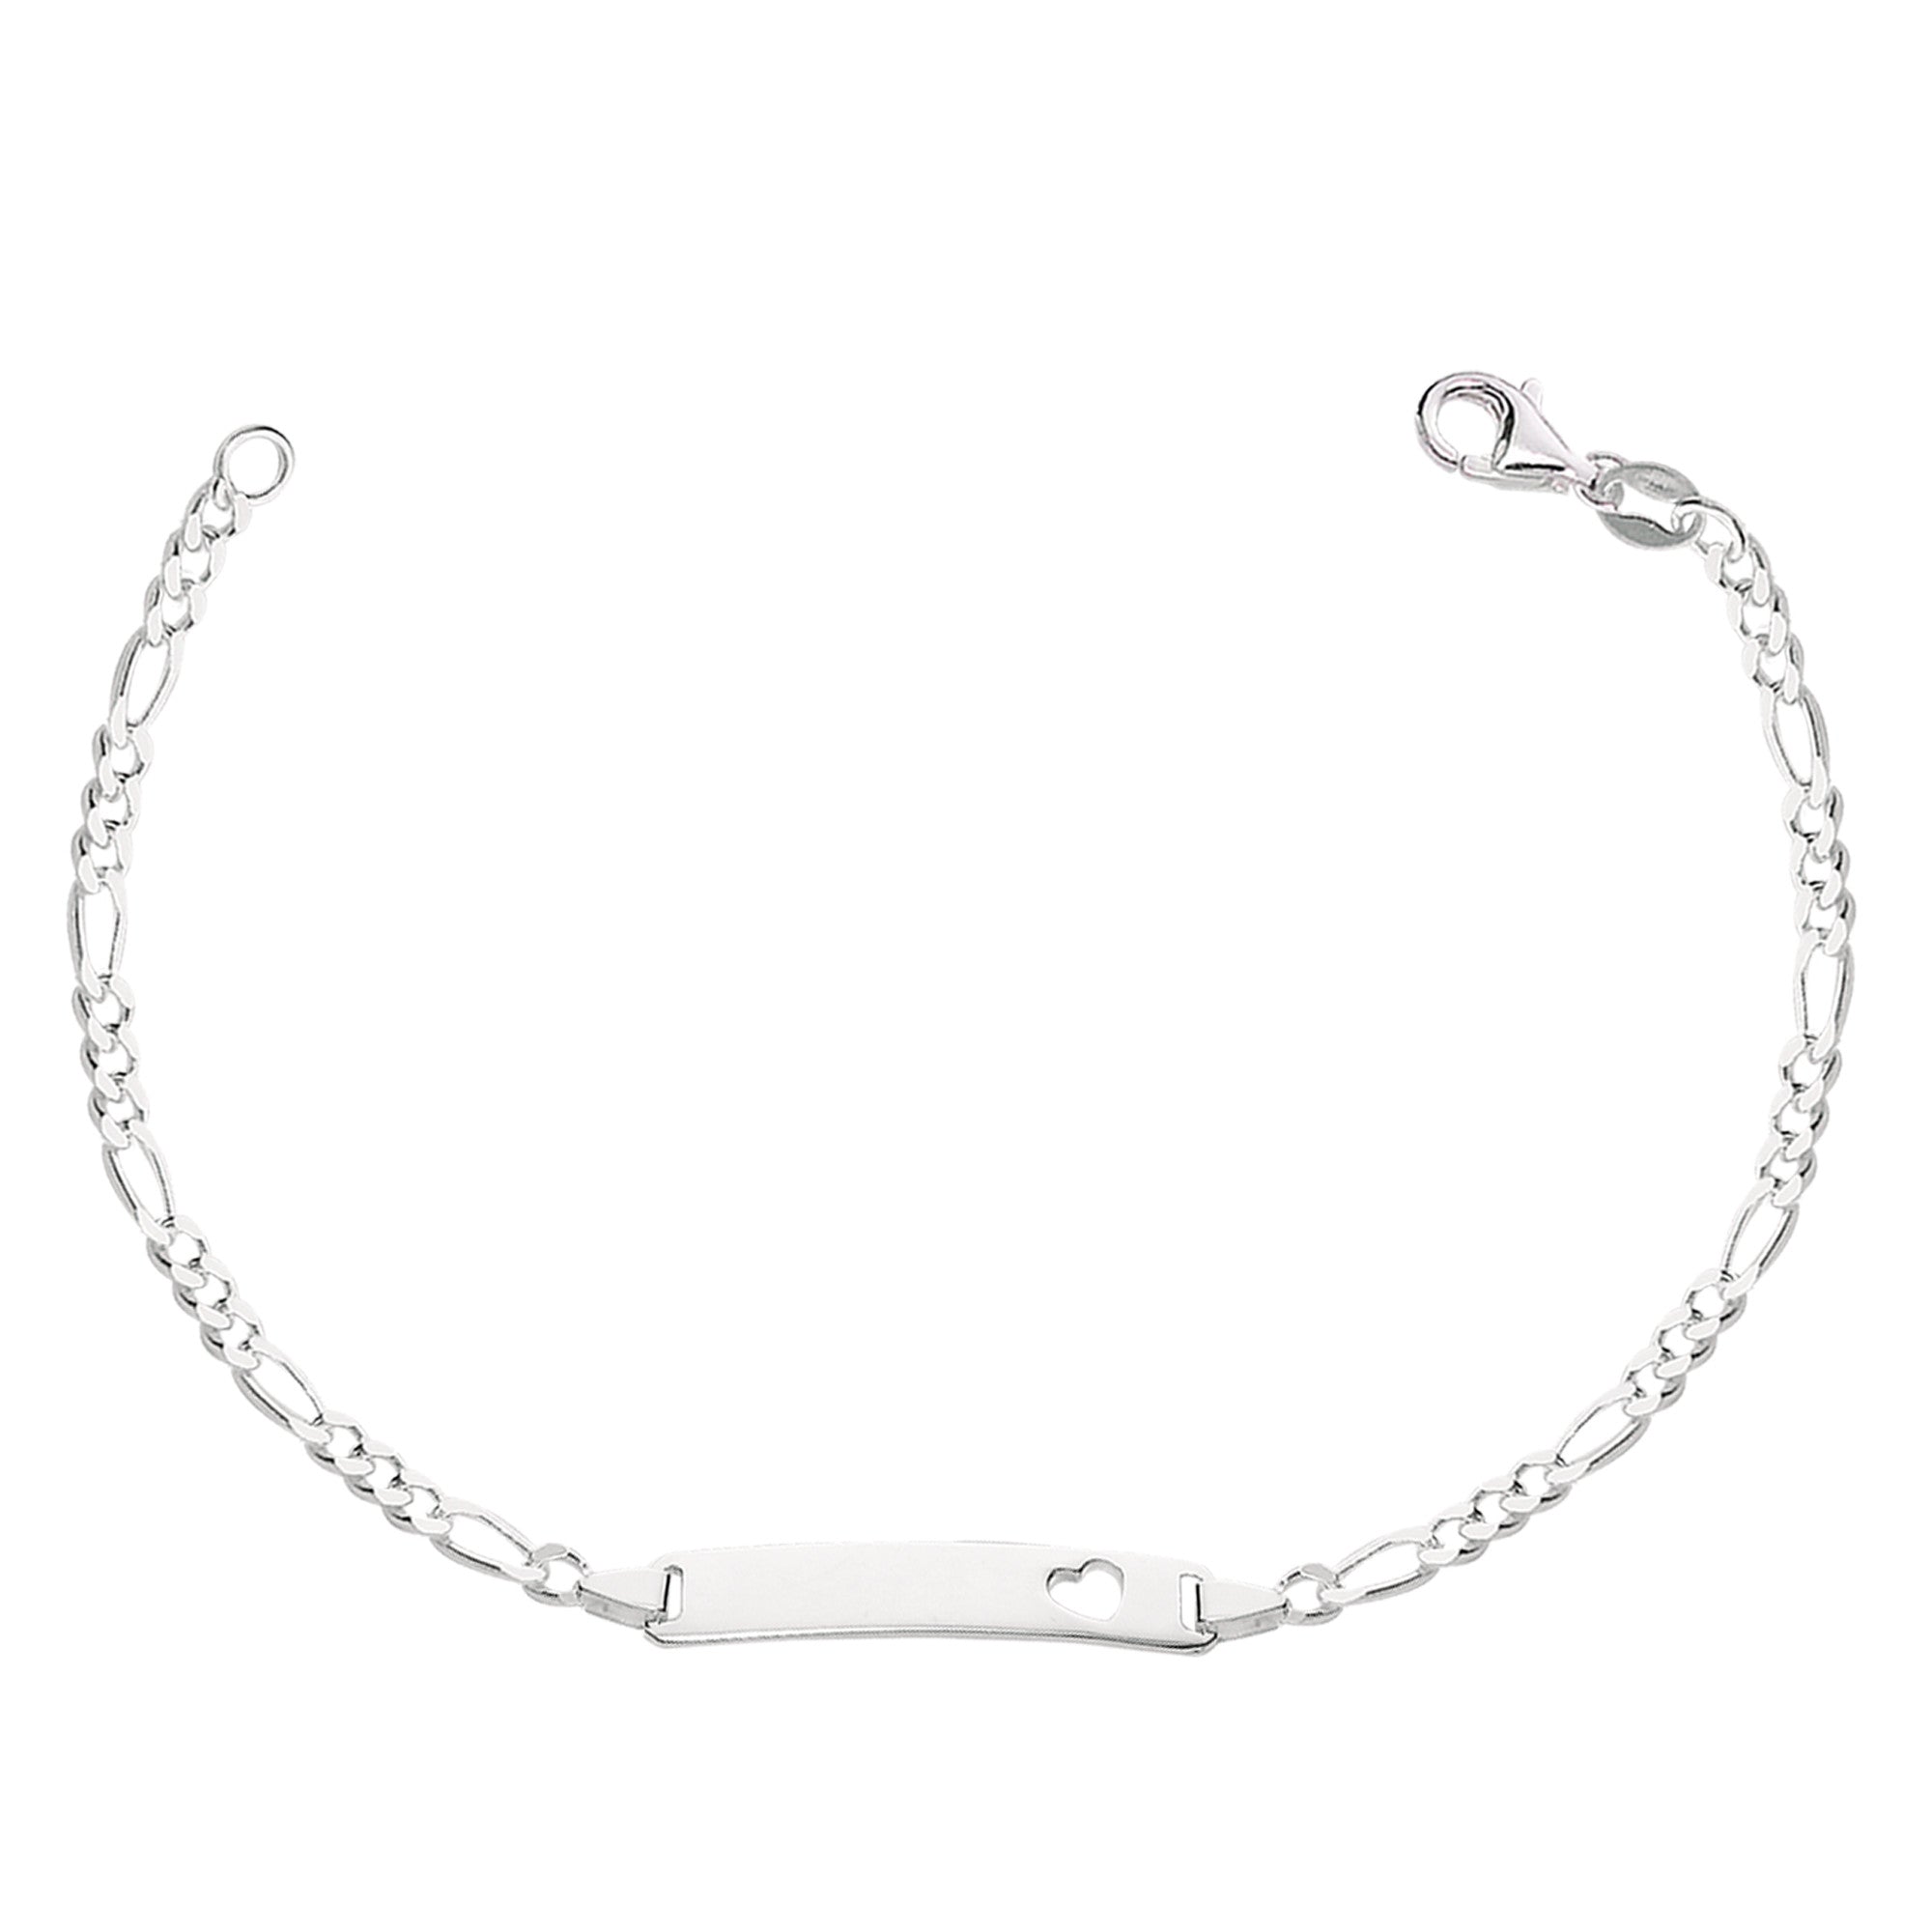 Figaro Chain Baby Id Bracelet In Sterling Silver - 6 Inches - JewelryAffairs
 - 1